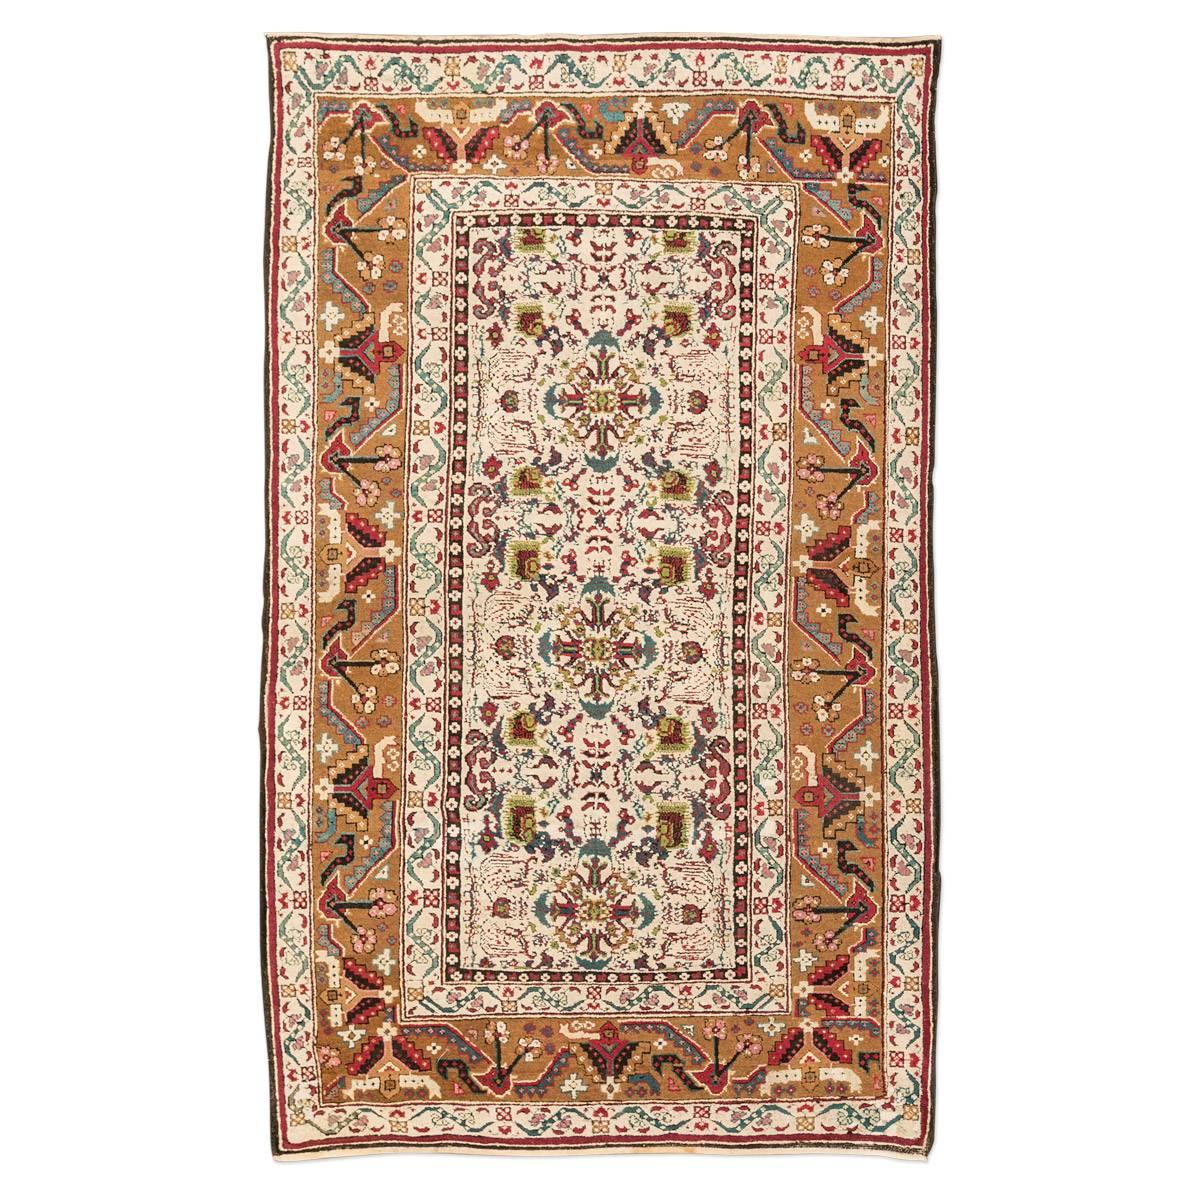 Agra rug from India, from a private collection in England at one of the most prestigious dealers in Europe.
- Classic design with white background and borders on earth. The design is a small Classic design of this type of production in green,